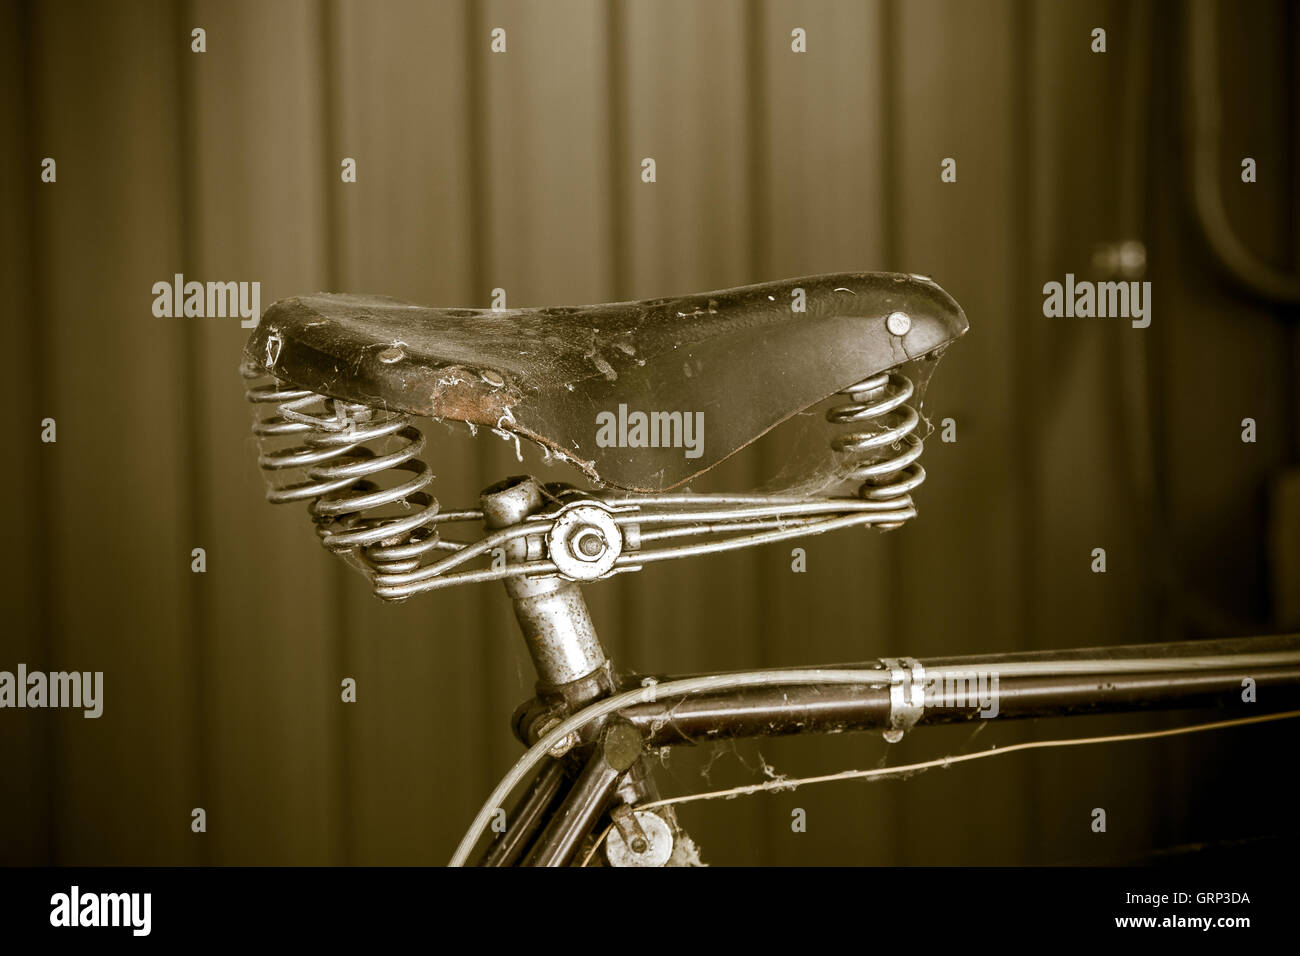 A closeup of a saddle on an old vintage neglected bicycle. Stock Photo